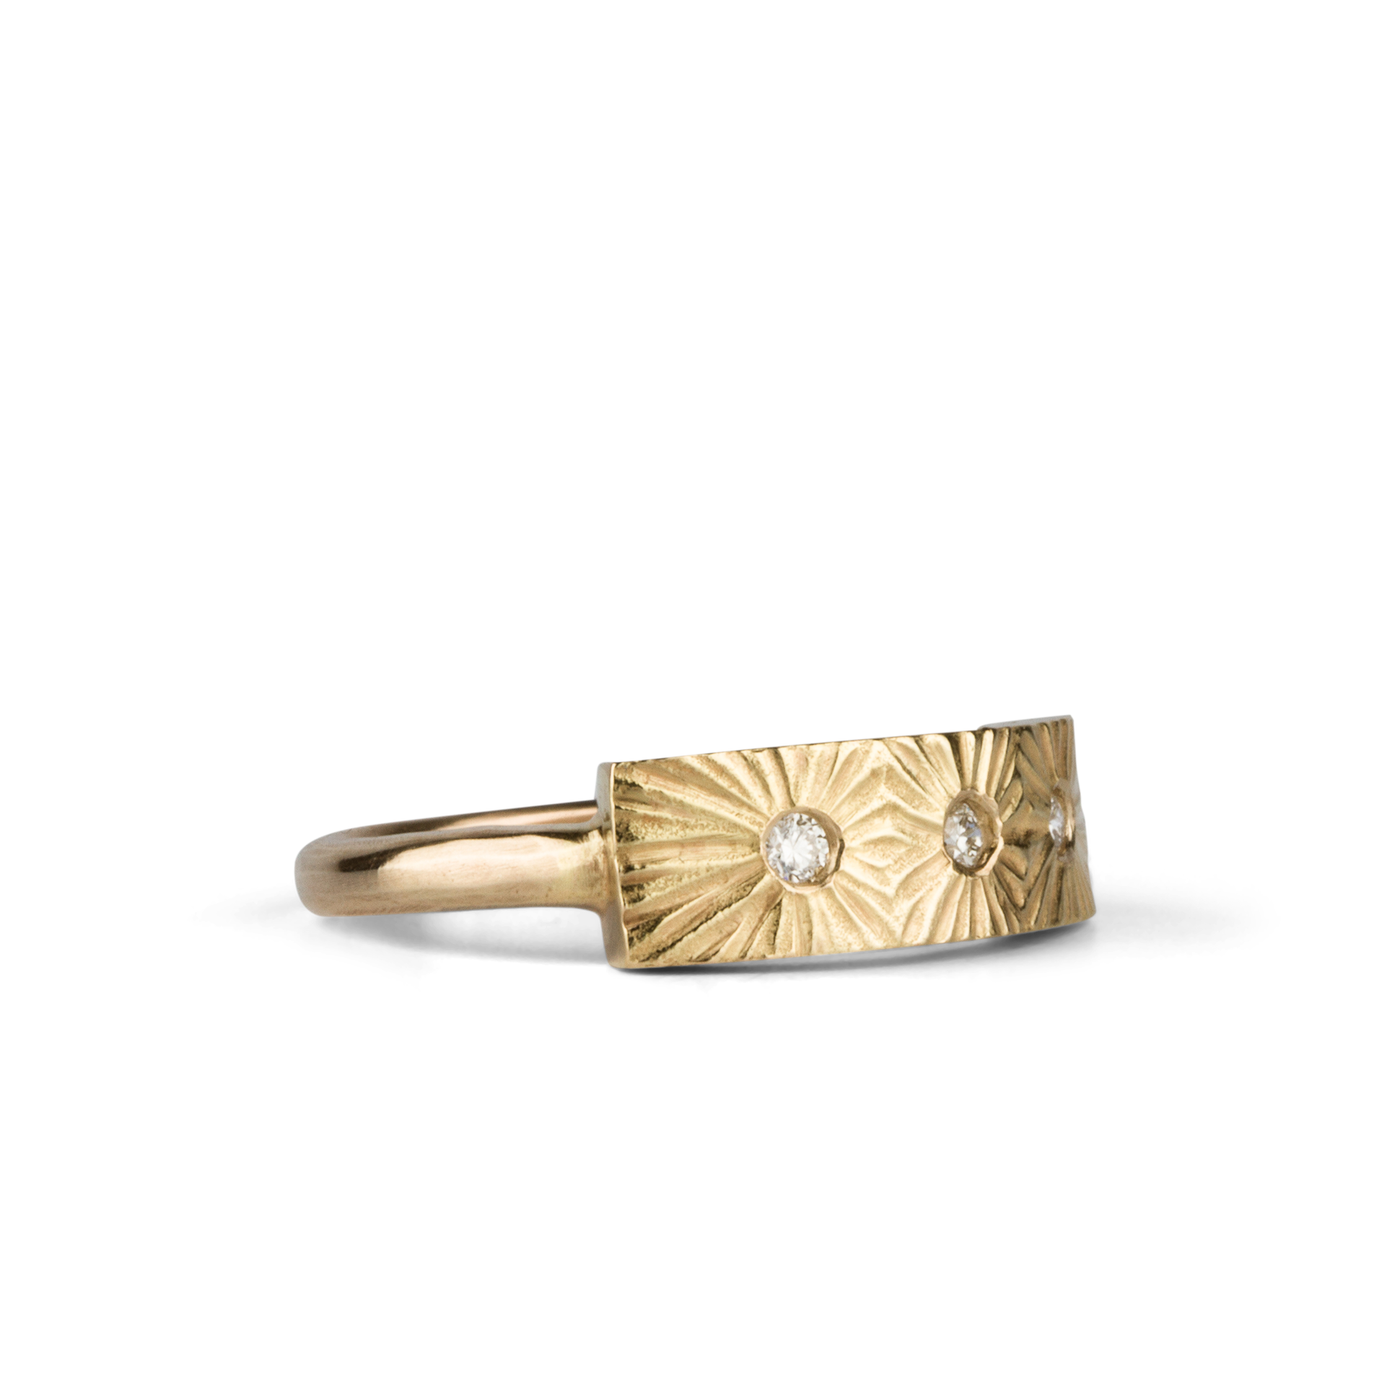 Yellow gold bar ring with three diamonds and a carved sunburst design around each by Corey Egan side view #2 on a white background